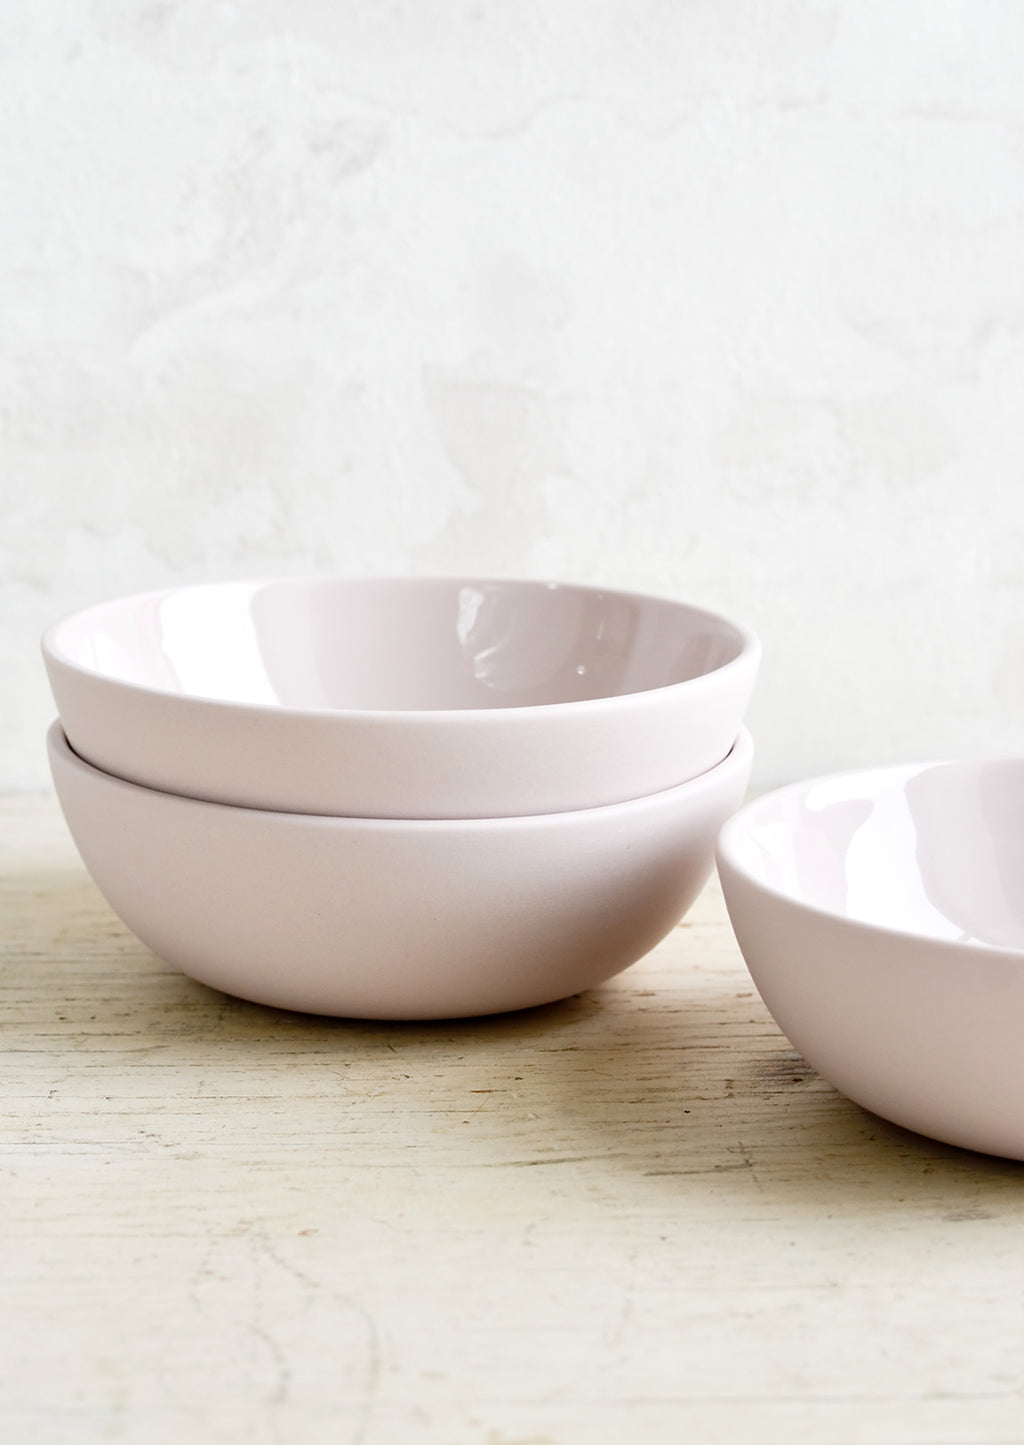 Raspberry Yogurt: Matte porcelain bowls in pale lavender with glossy interior.